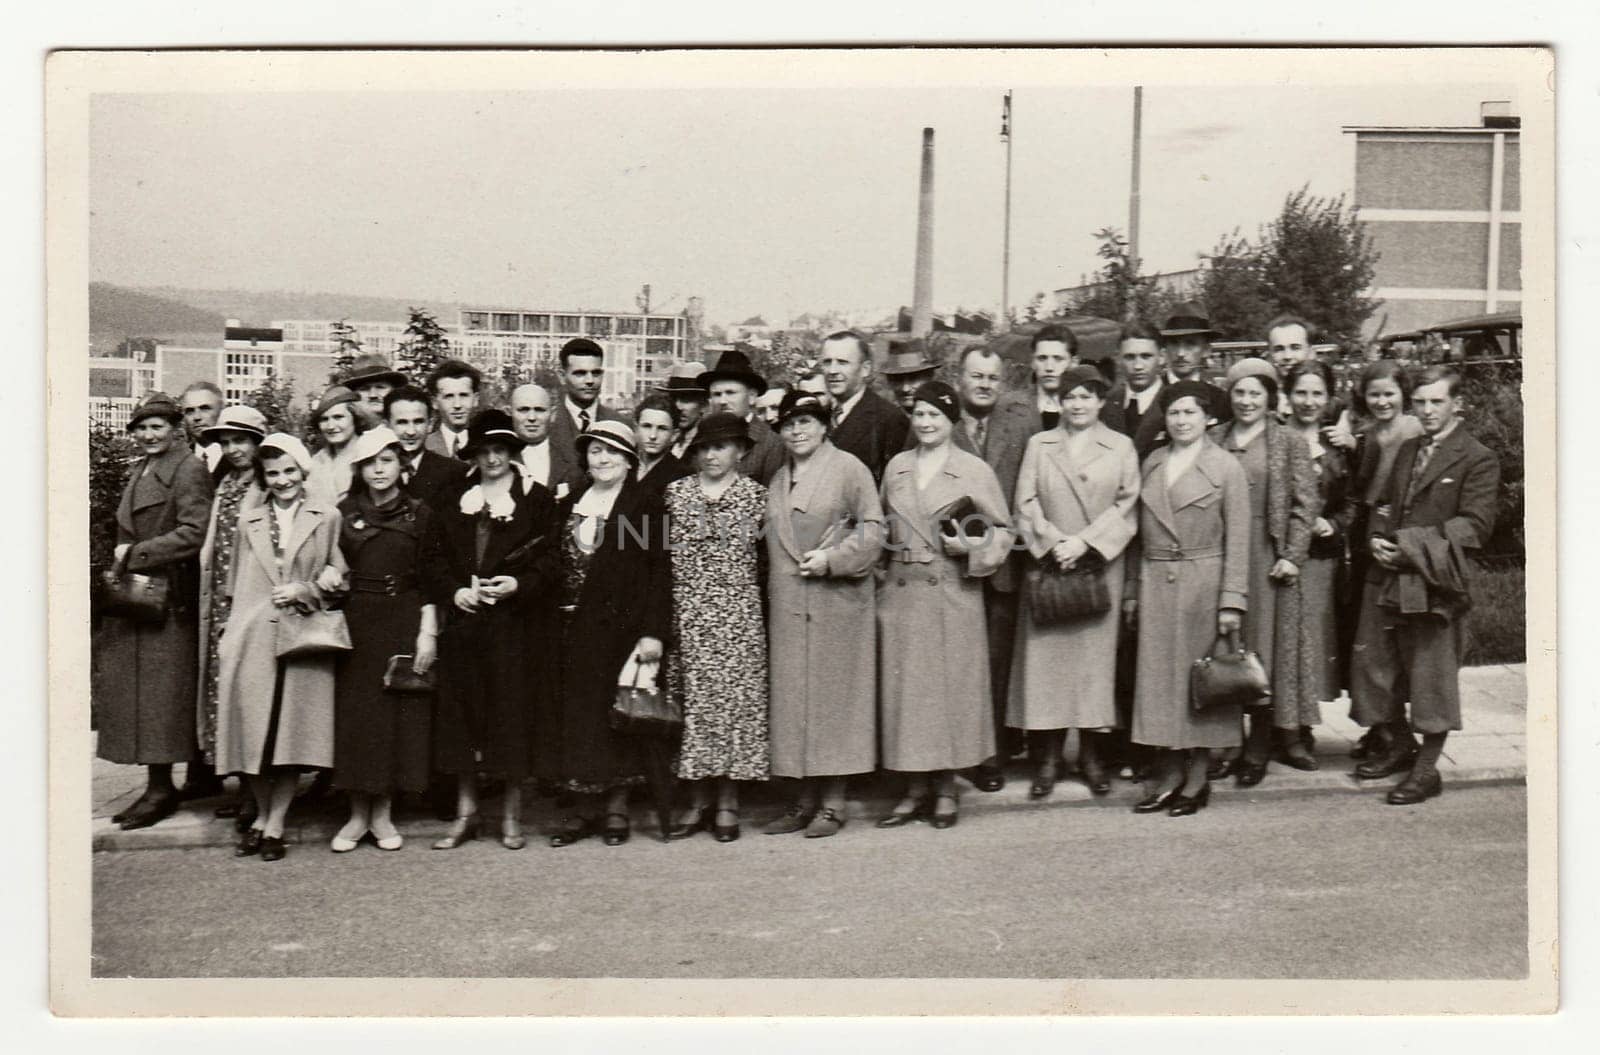 ZLIN, THE CZECHOSLOVAK REPUBLIC - AUGUST 15, 1934: Vintage photo shows group of people in front of Bata factories, on August 15, 1934.